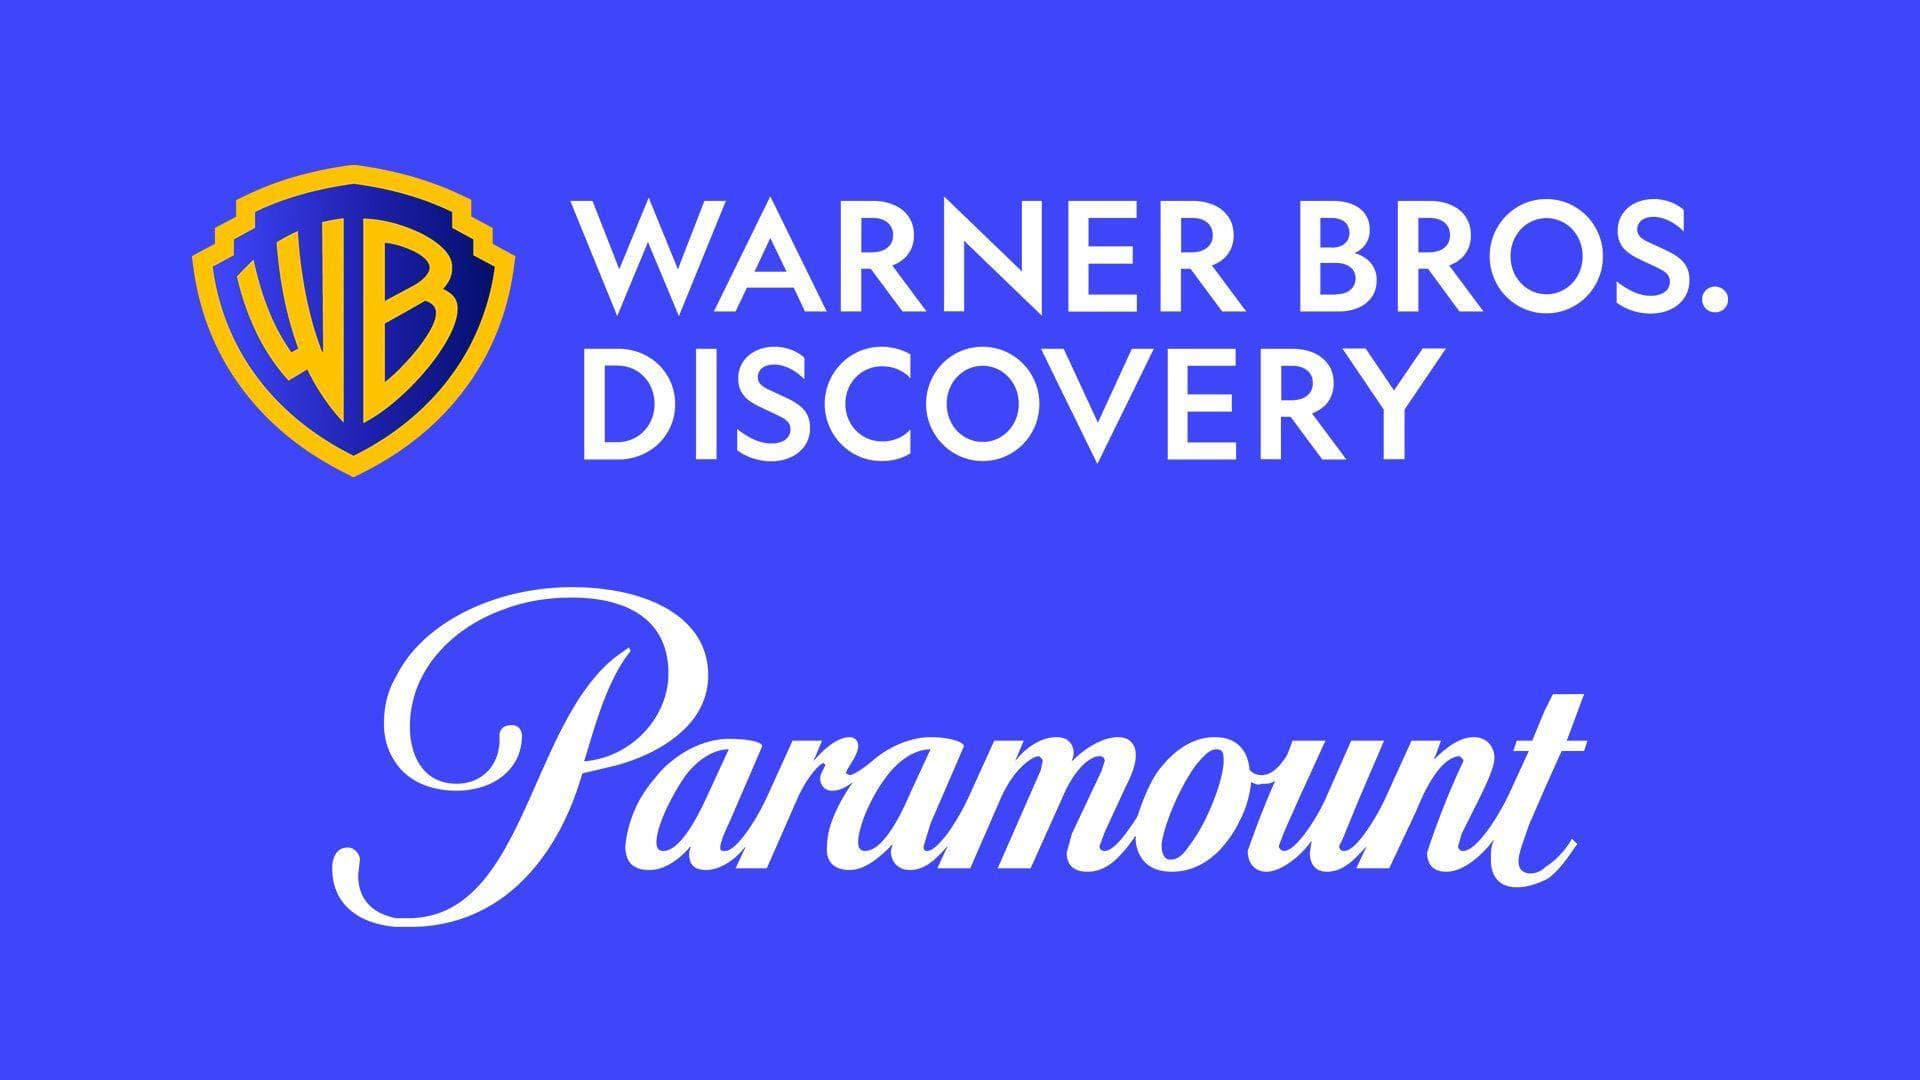 Warner Brothers Discovery and Paramount are in merger talks